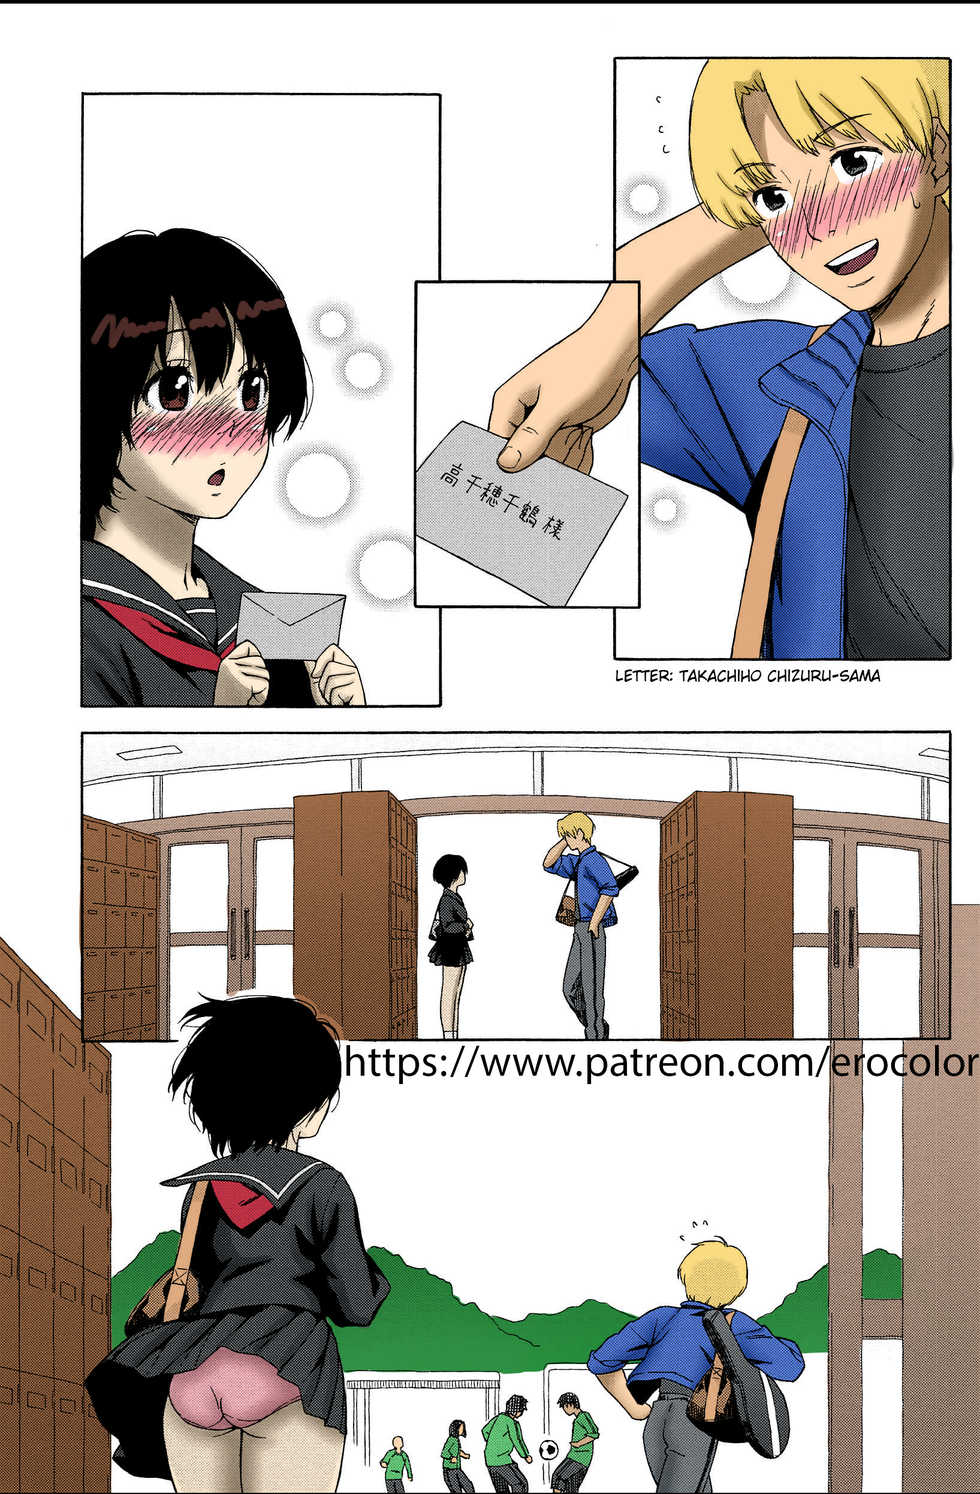 [Jingrock] Love Letter [English] [Erocolor] [Colorized] [chapter1] - Page 6